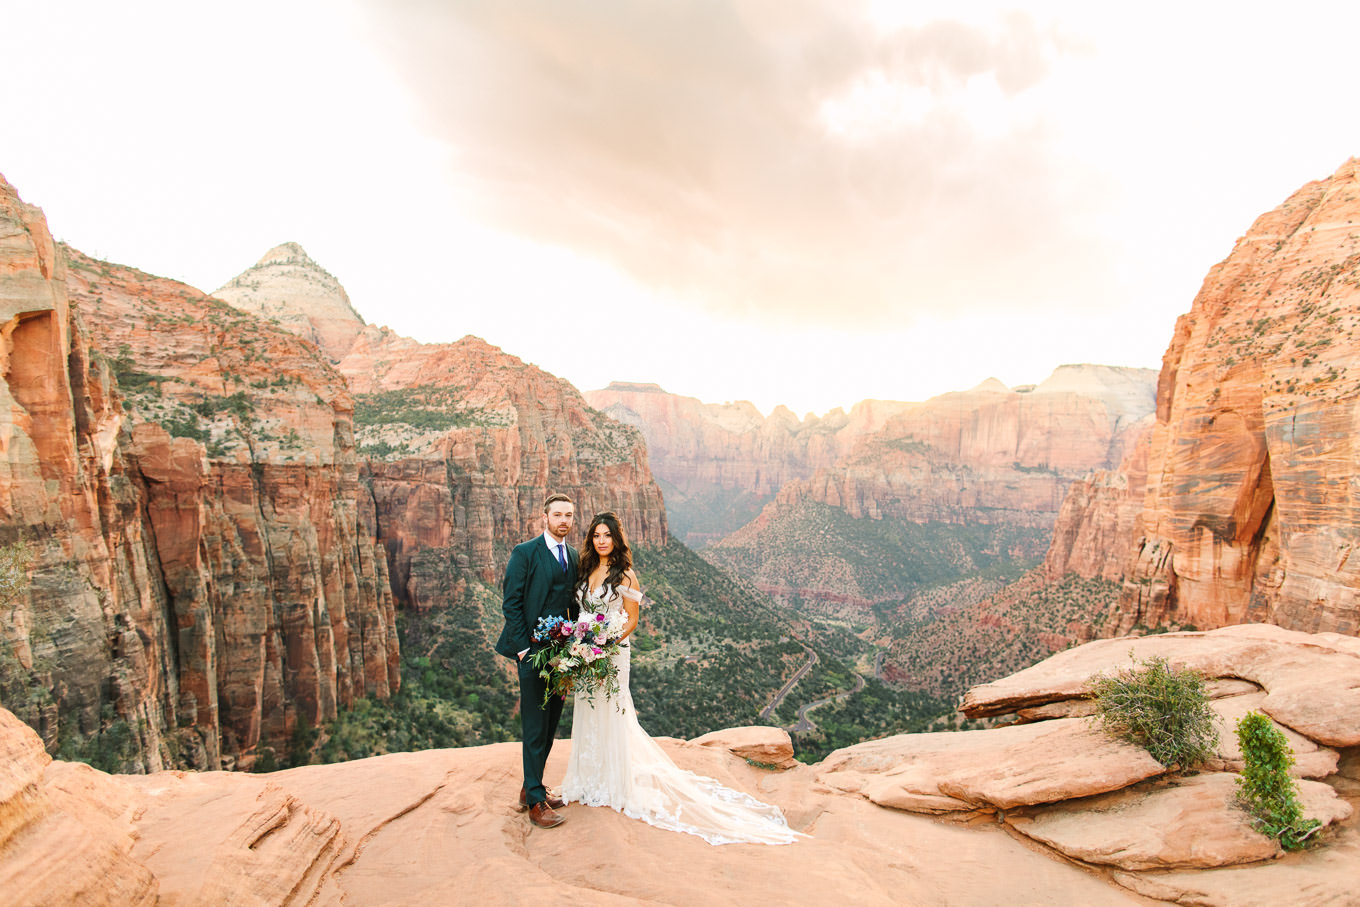 Canyon overlook portrait | Zion National Park sunset elopement scenic overlook | Colorful adventure elopement photography | #utahelopement #zionelopement #zionwedding #undercanvaszion   Source: Mary Costa Photography | Los Angeles